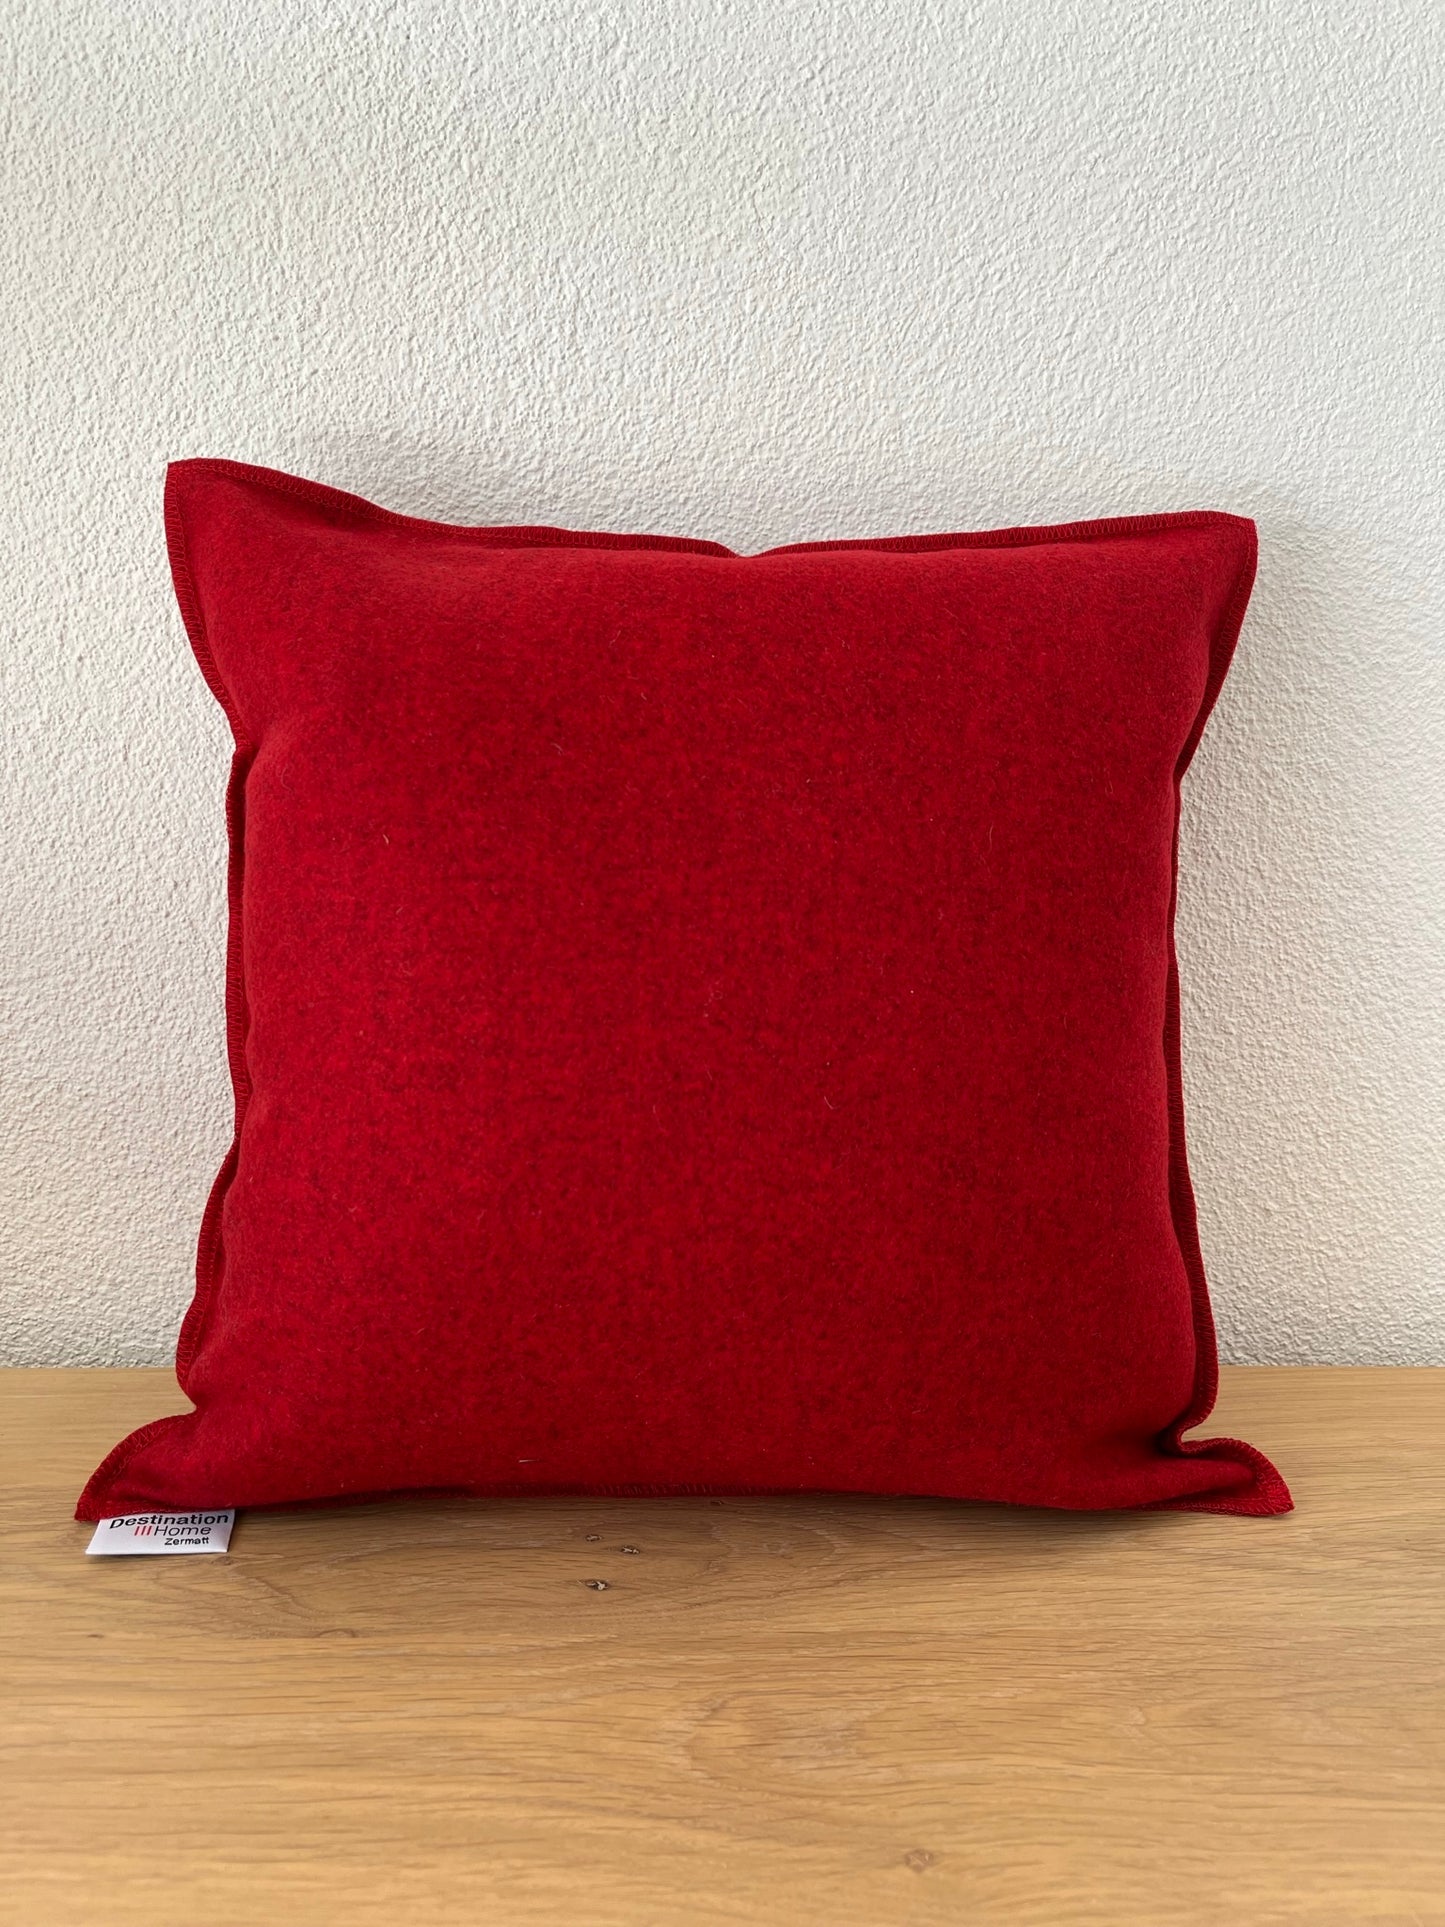 Cushion cover with handknitted details, red